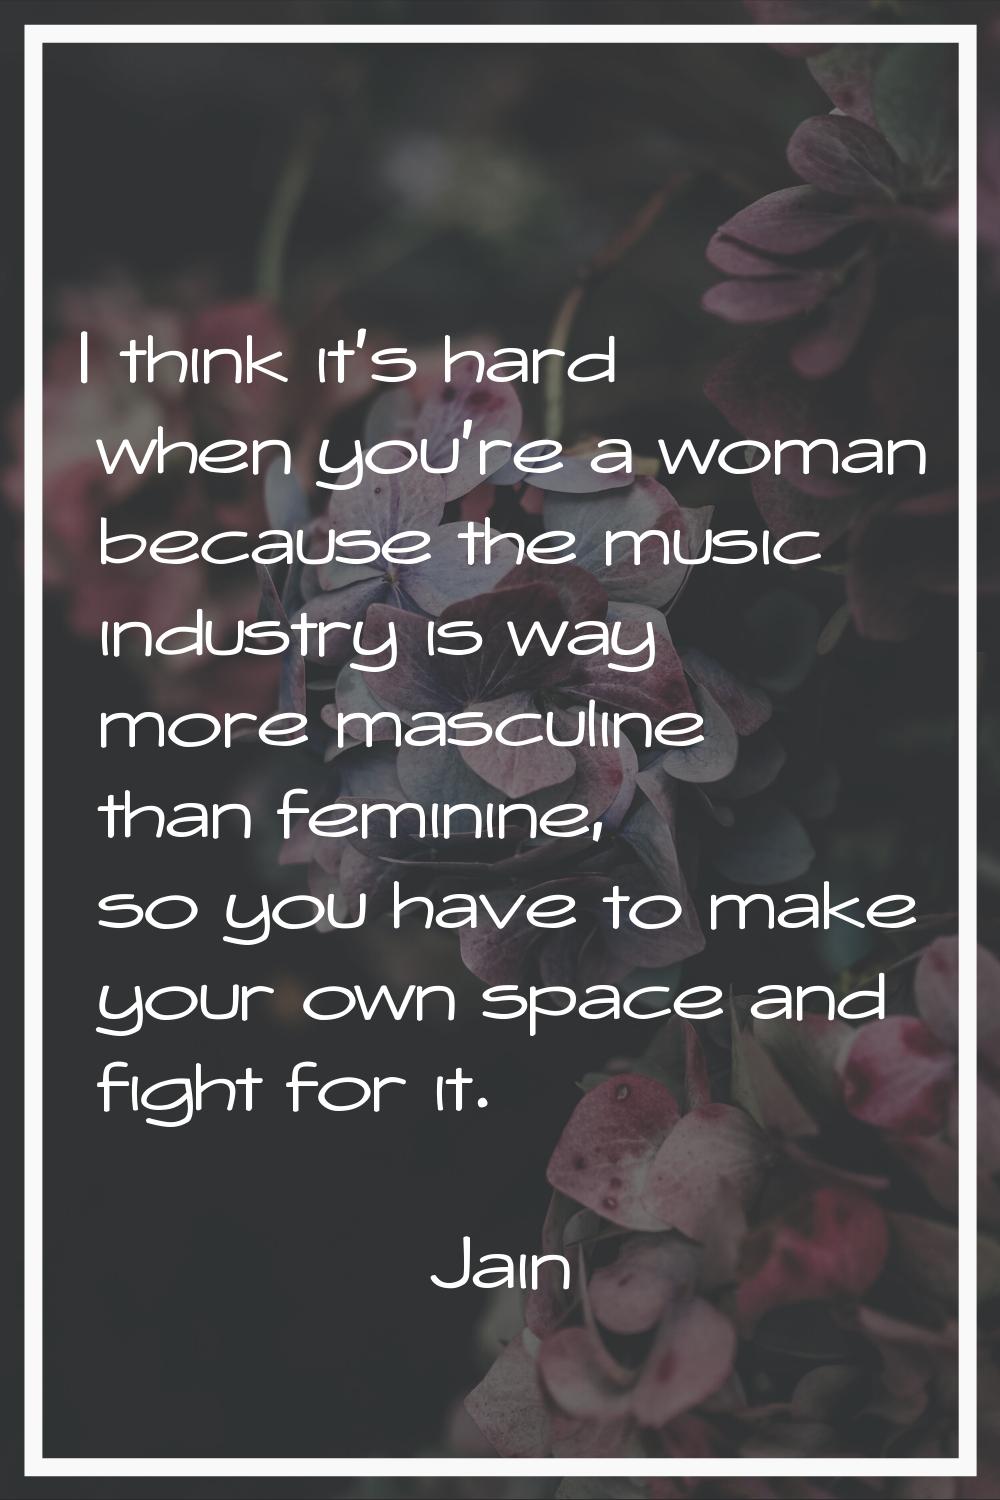 I think it's hard when you're a woman because the music industry is way more masculine than feminin